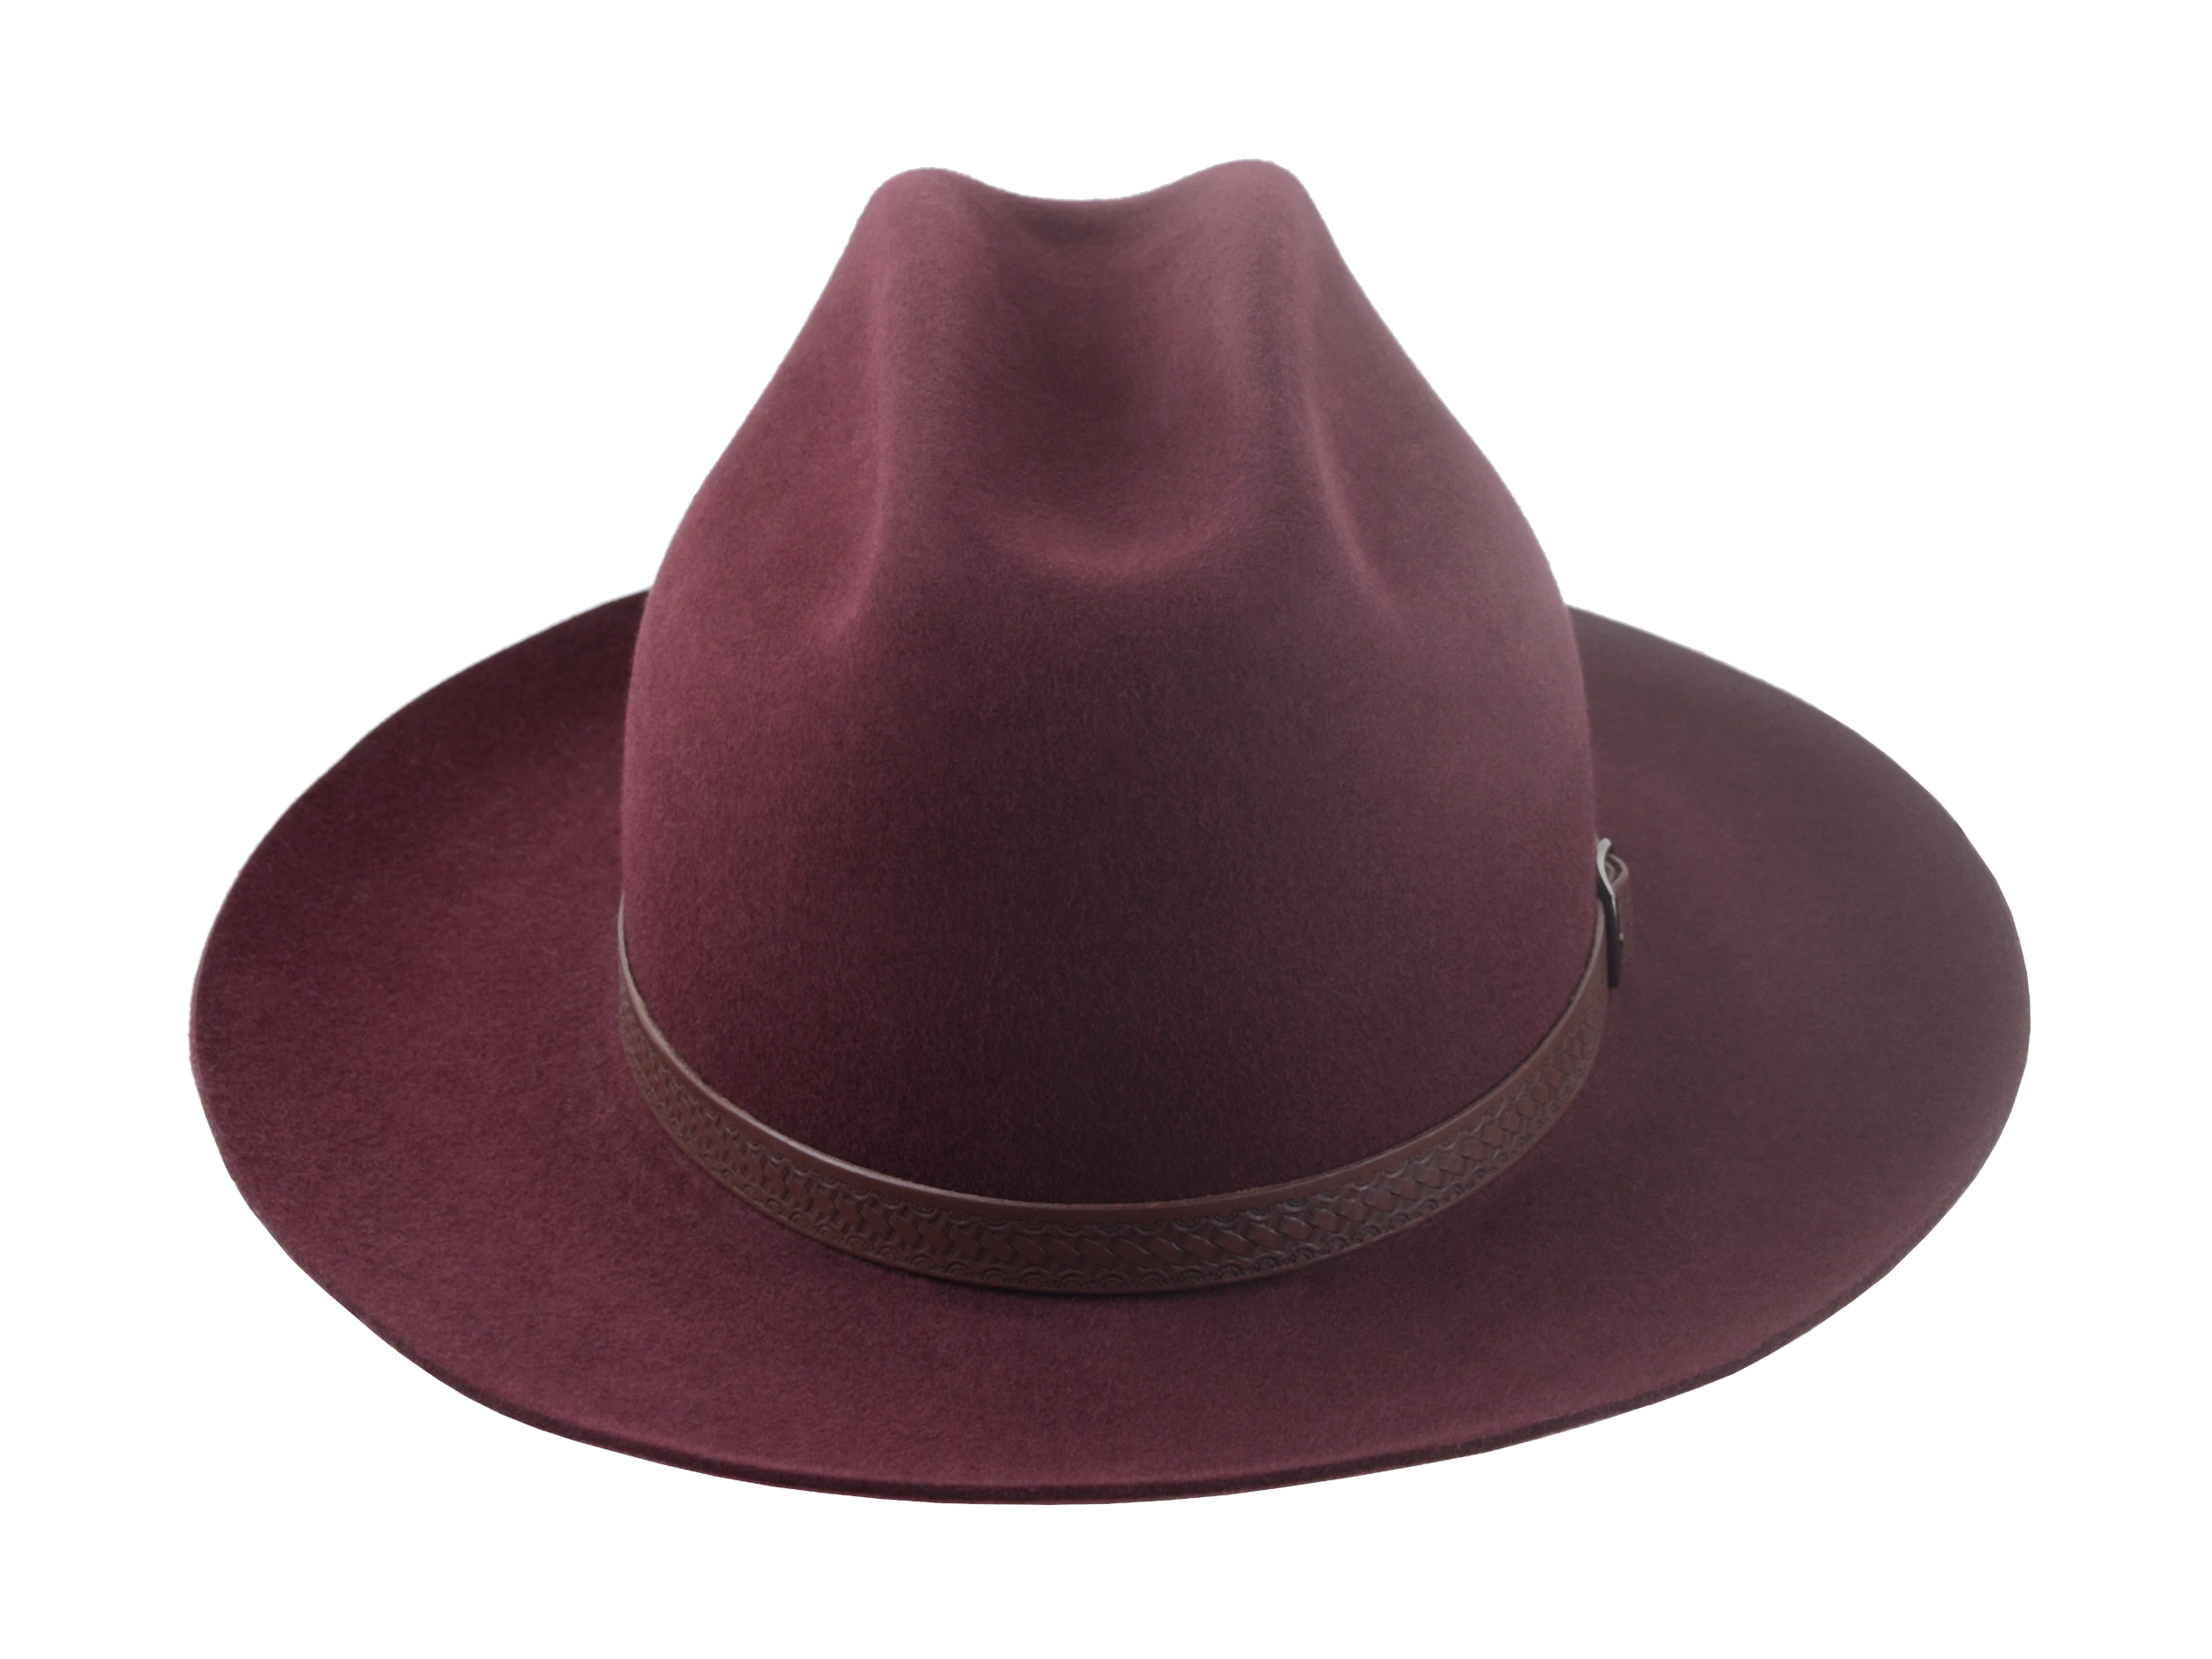 The Patriot: Frontal view capturing the hat's distinguished burgundy color and the elegance of its design | Agnoulita Hats